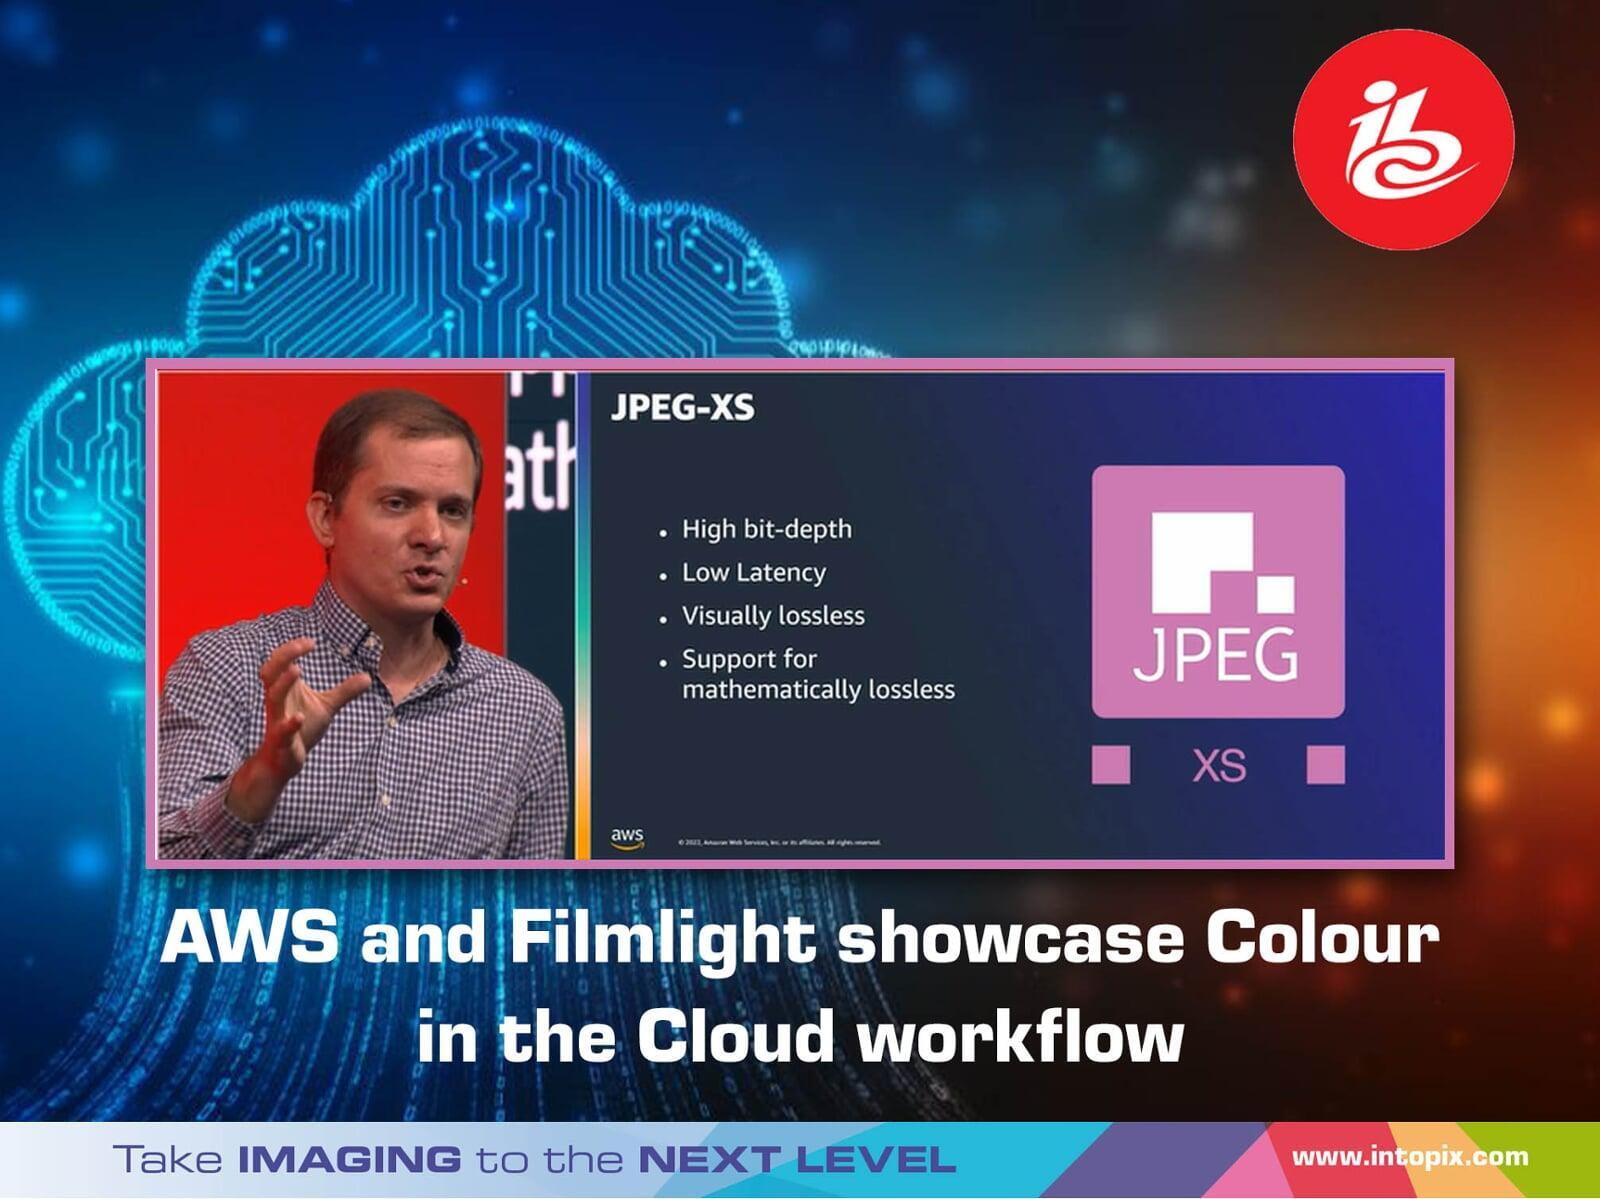 AWS 和 Filmlight 展示了 Color in Cloud 工作流程， powered by JPEG XS時